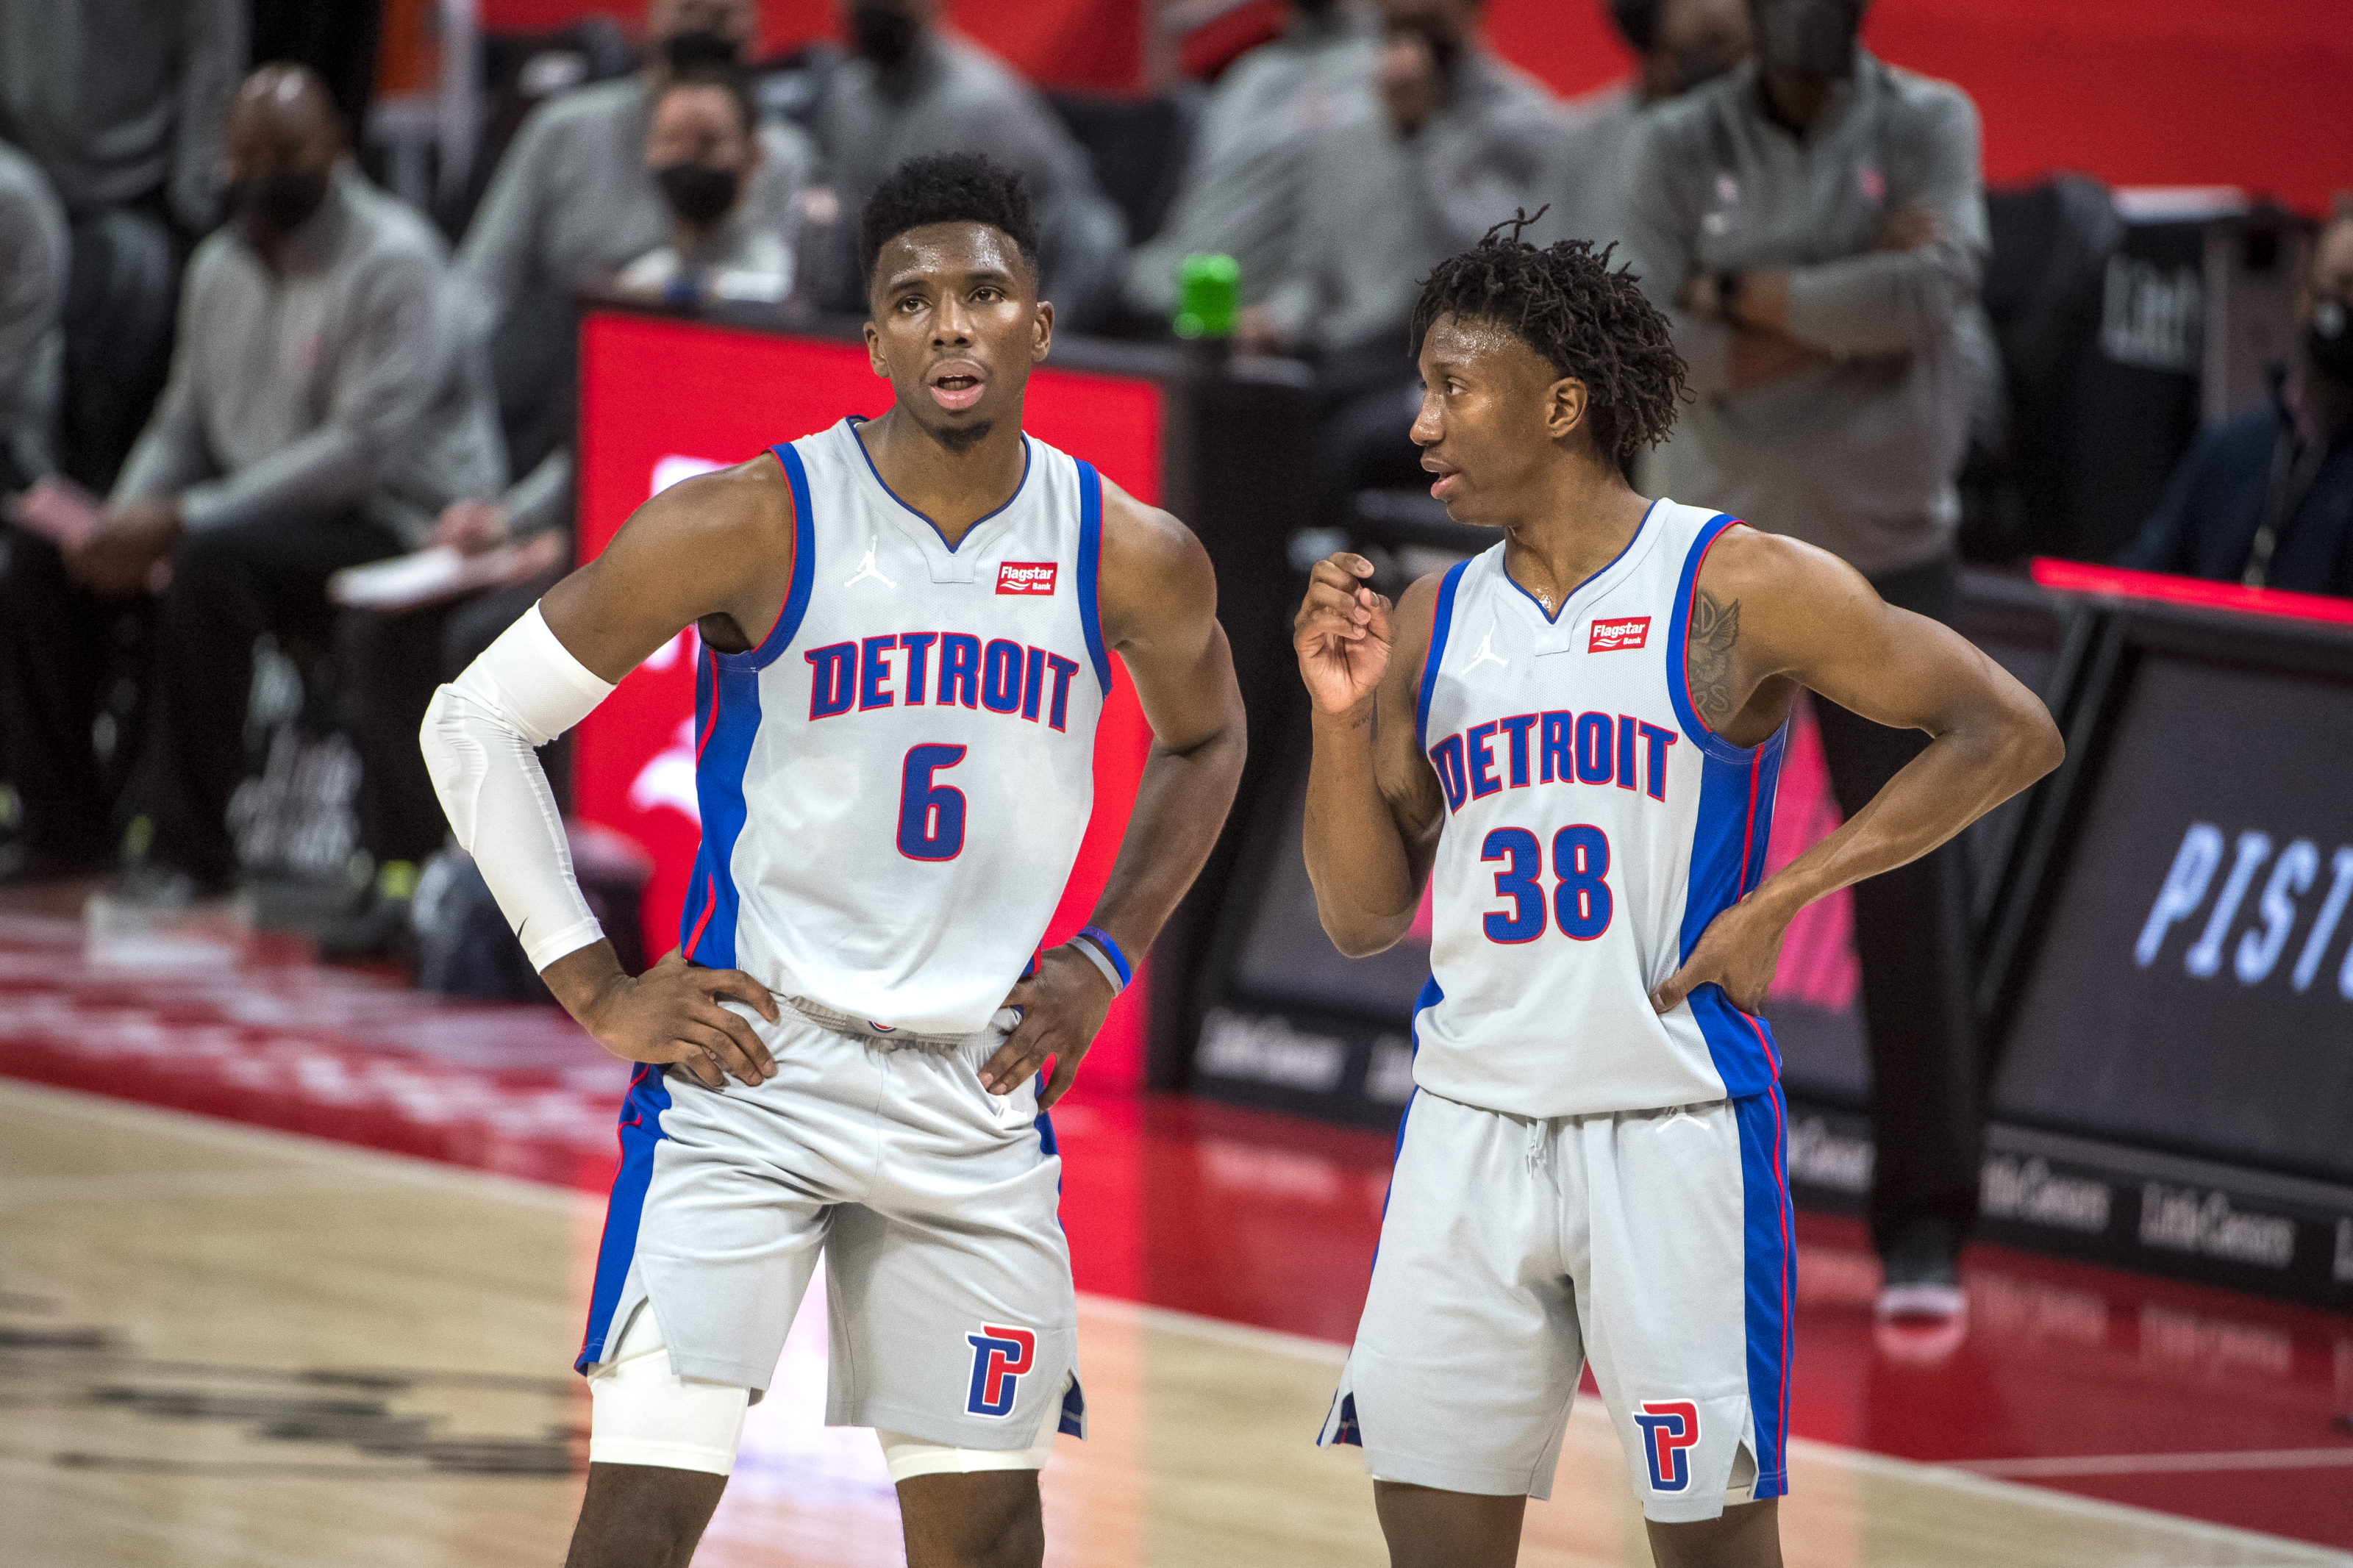 5 roster moves the Detroit Pistons need to make this offseason